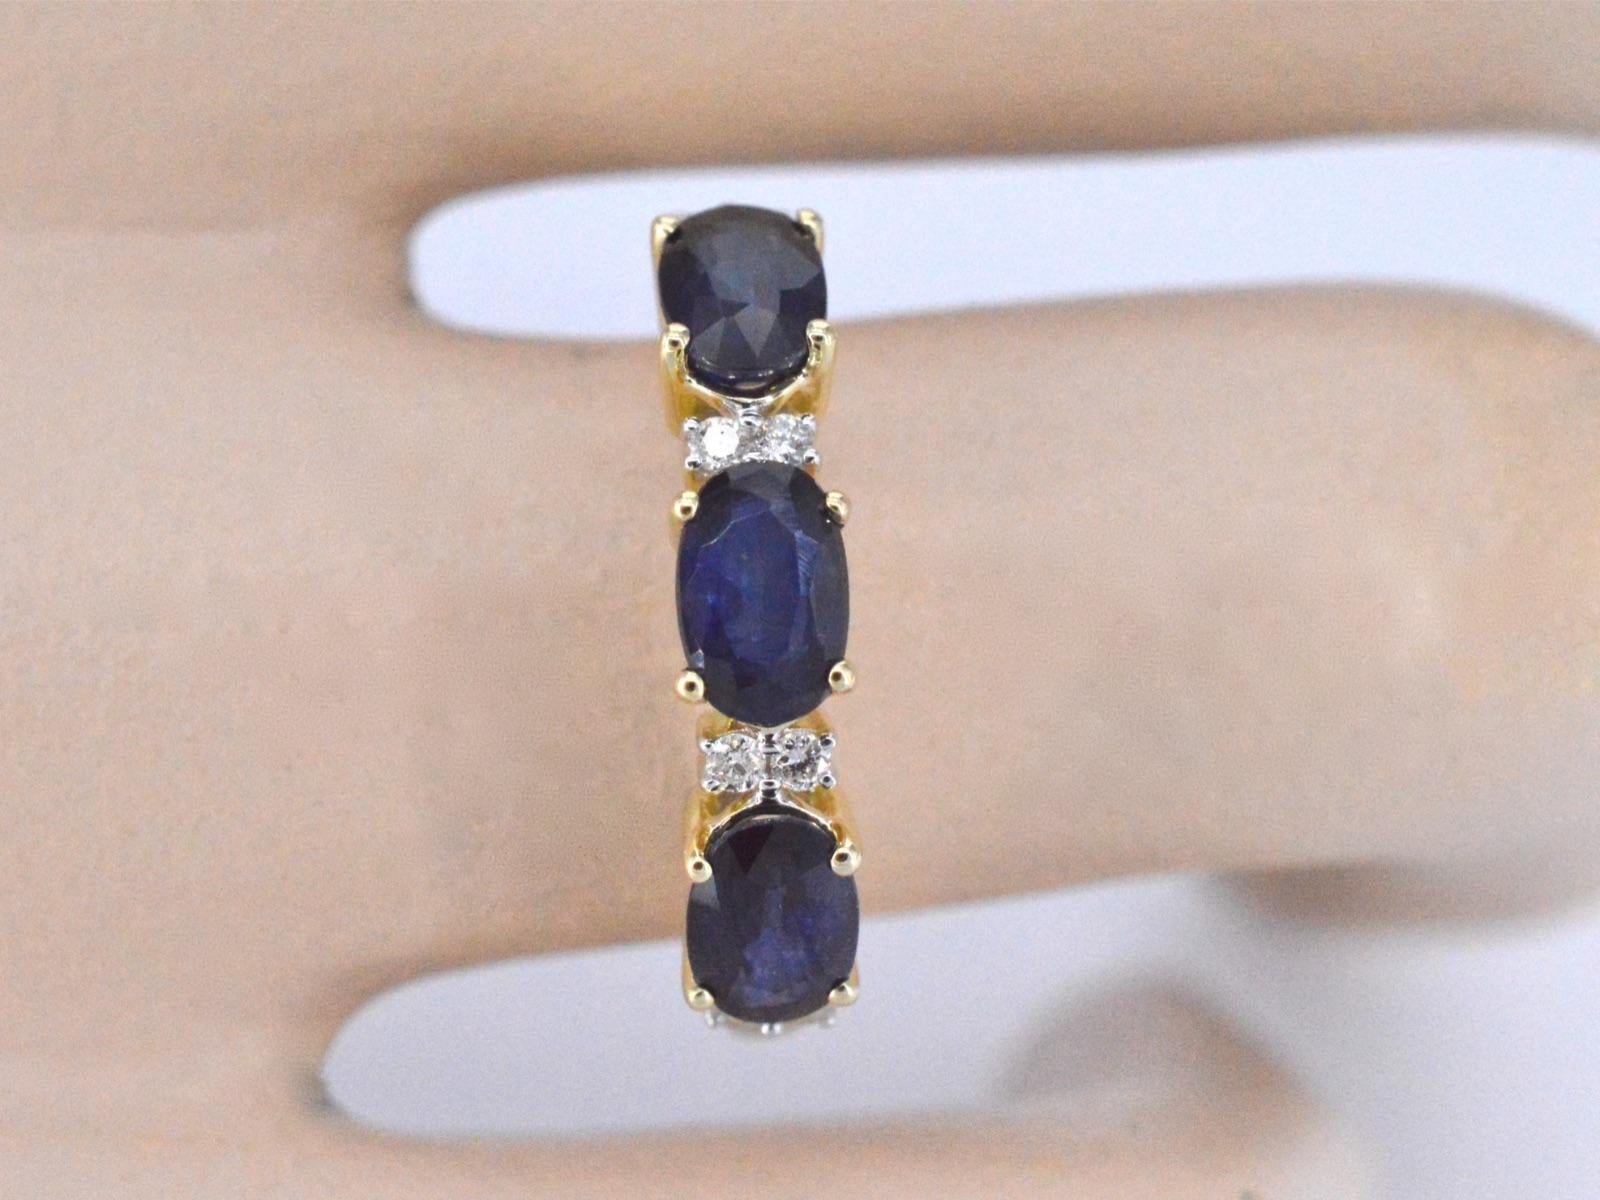 Indulge in the beauty of the gold ring with diamonds and sapphire. Crafted in luxurious gold, this ring features a captivating design adorned with diamonds and a mesmerizing sapphire. The diamonds add a dazzling sparkle, while the sapphire brings a